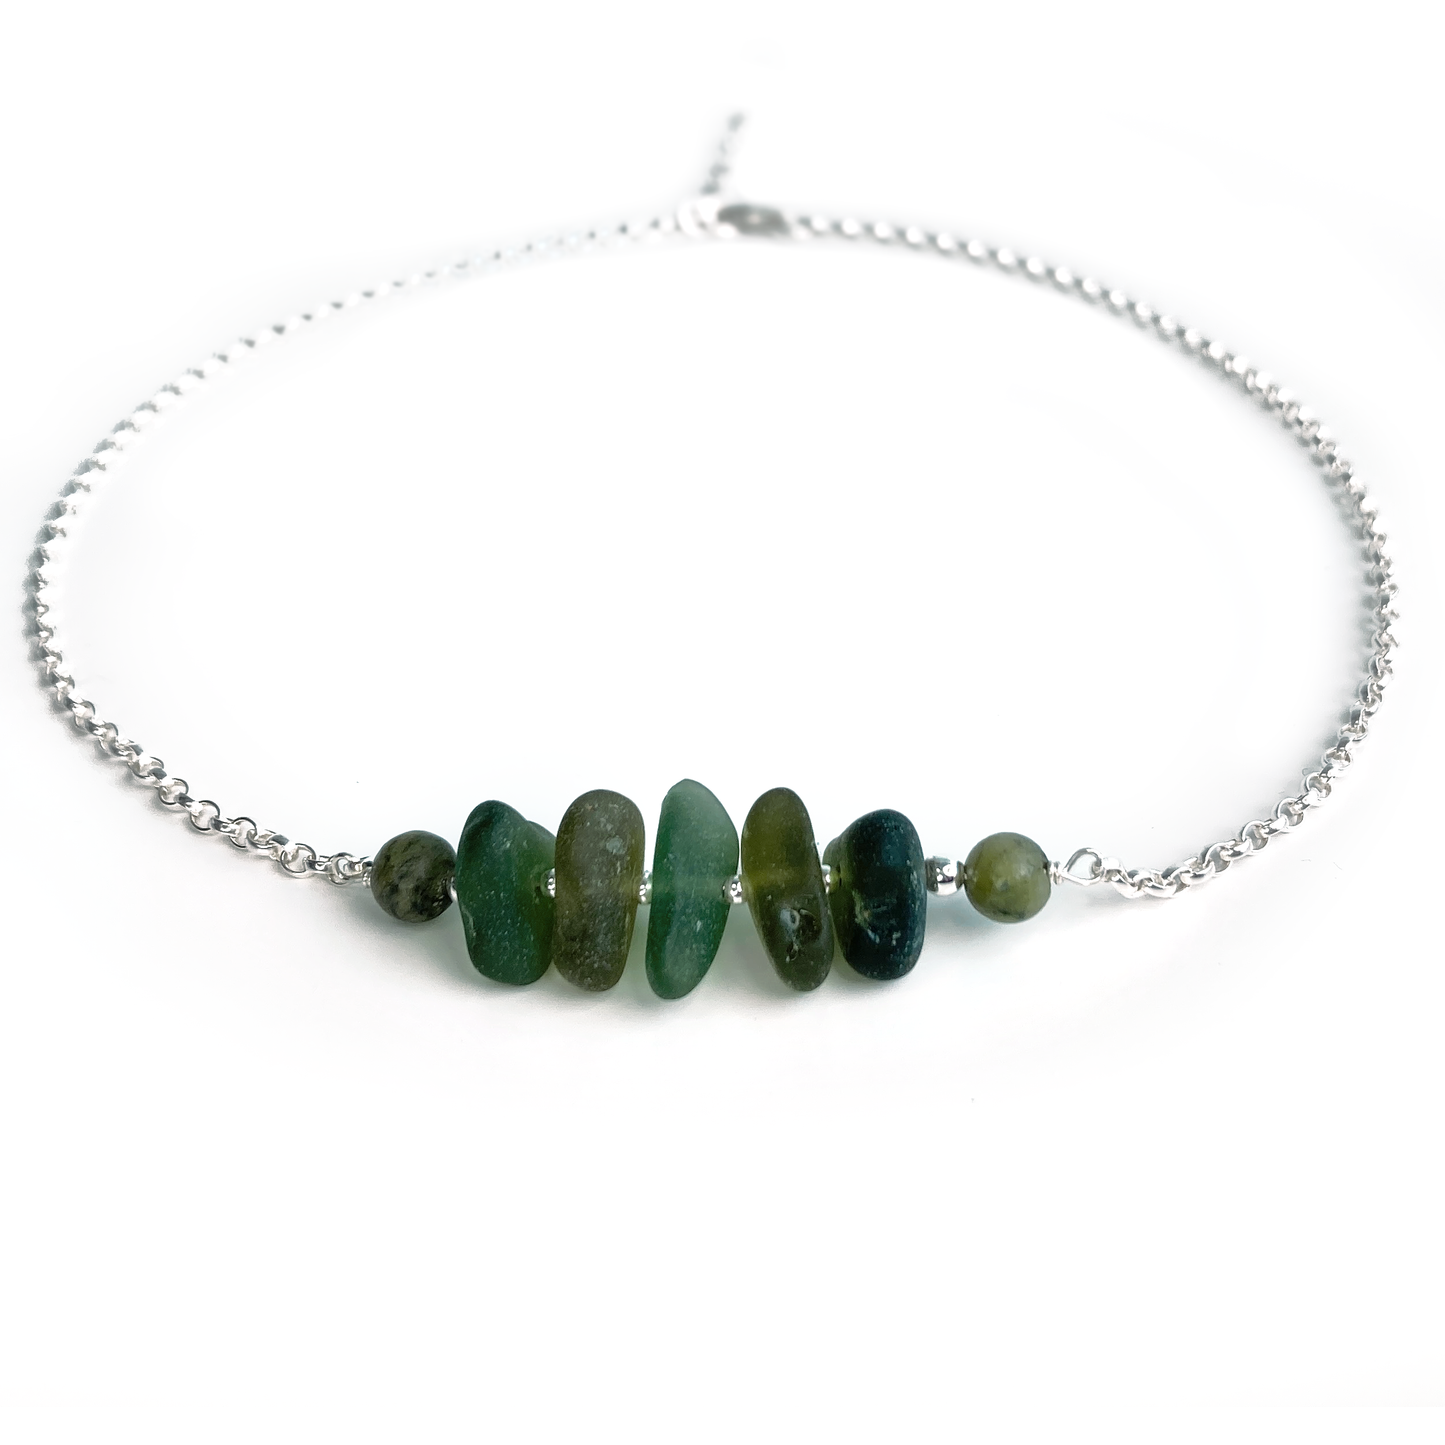 Olive Green Sea Glass Necklace with Jade Crystal Beads - Sterling Silver Scottish Jewellery